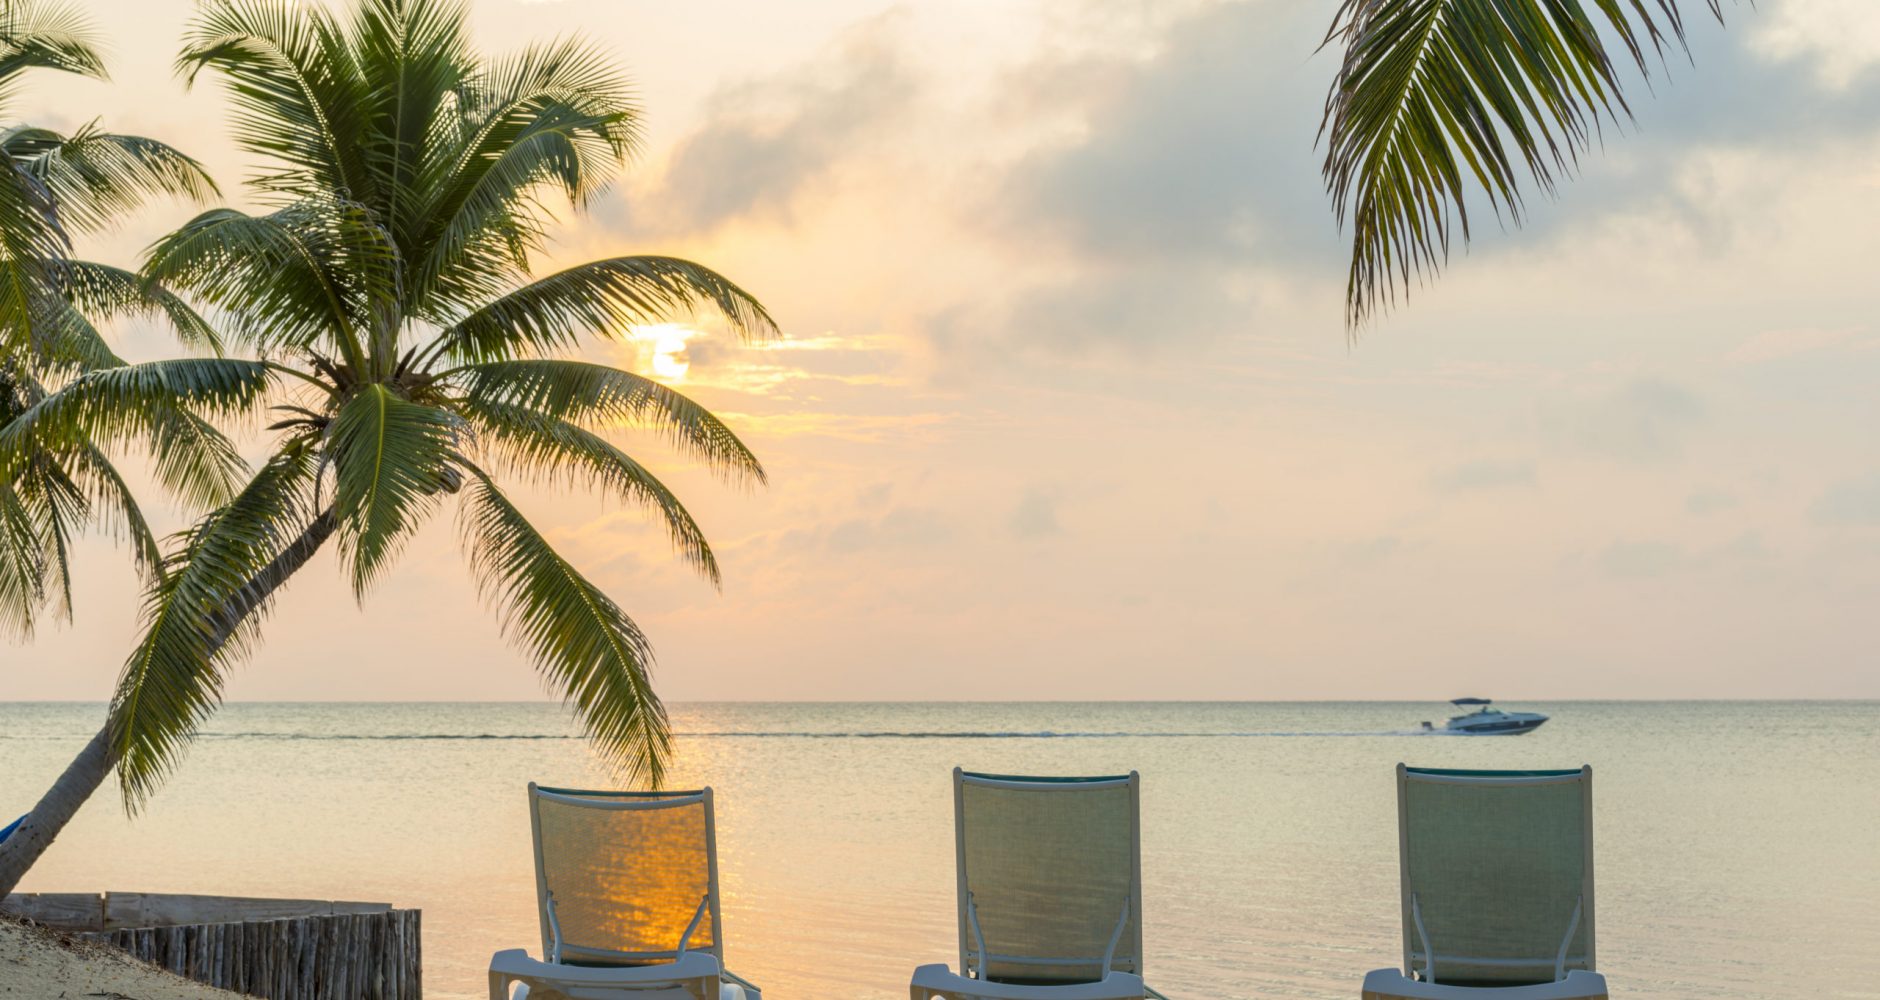 Sunrise over the ocean on dream beach vacation with palmtrees and deckchairs